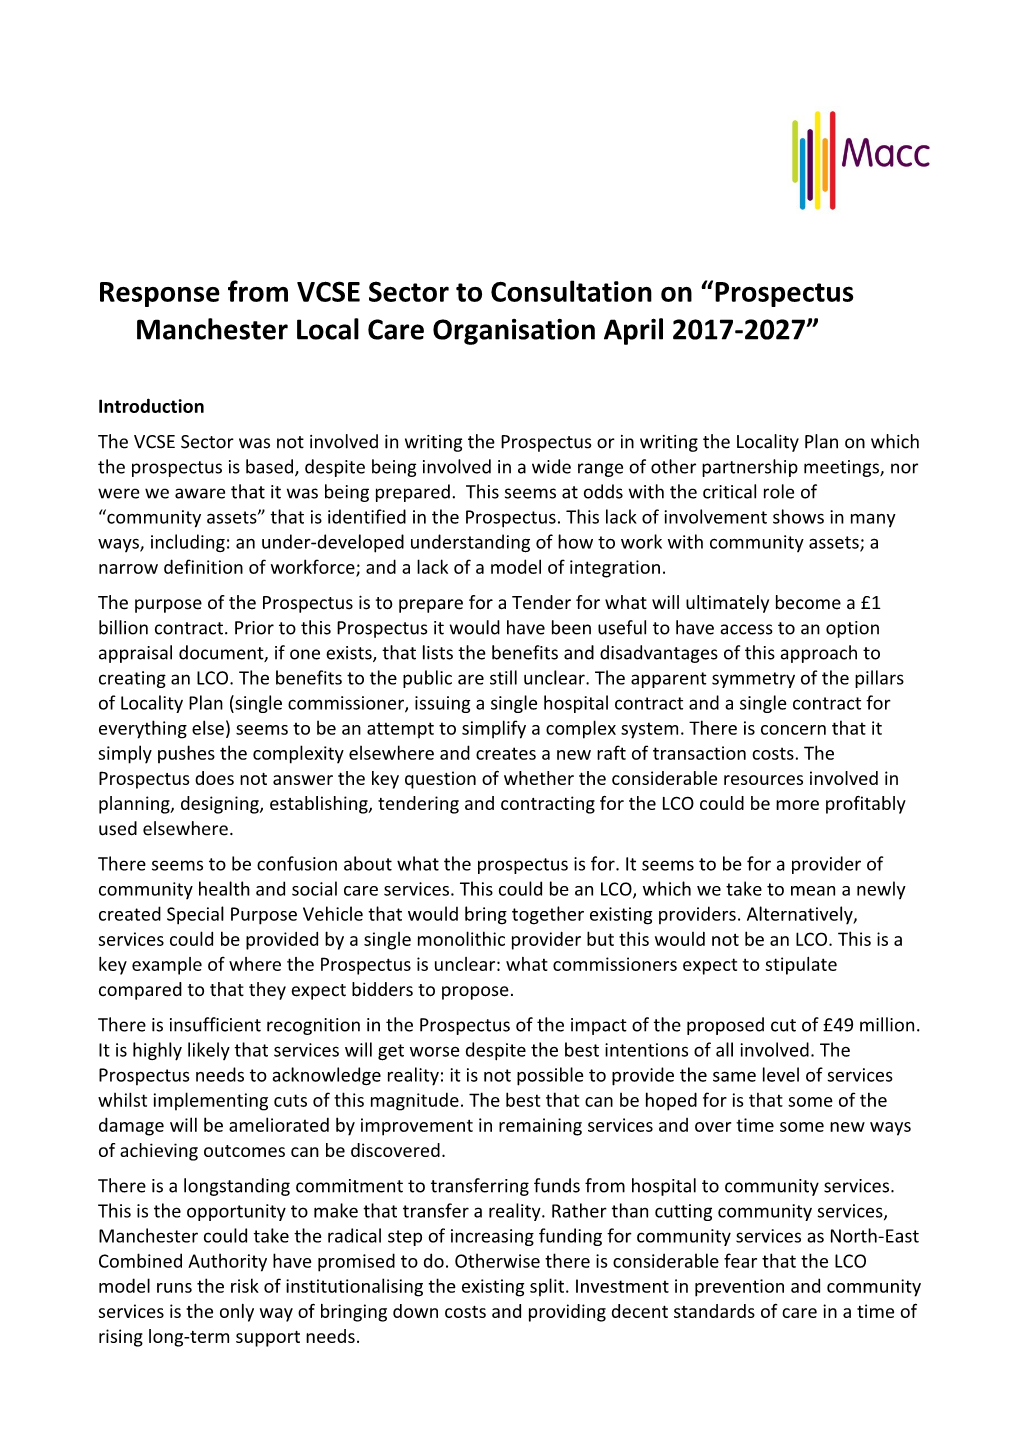 Response from VCSE Sector to Consultation on Prospectus Manchester Local Care Organisation